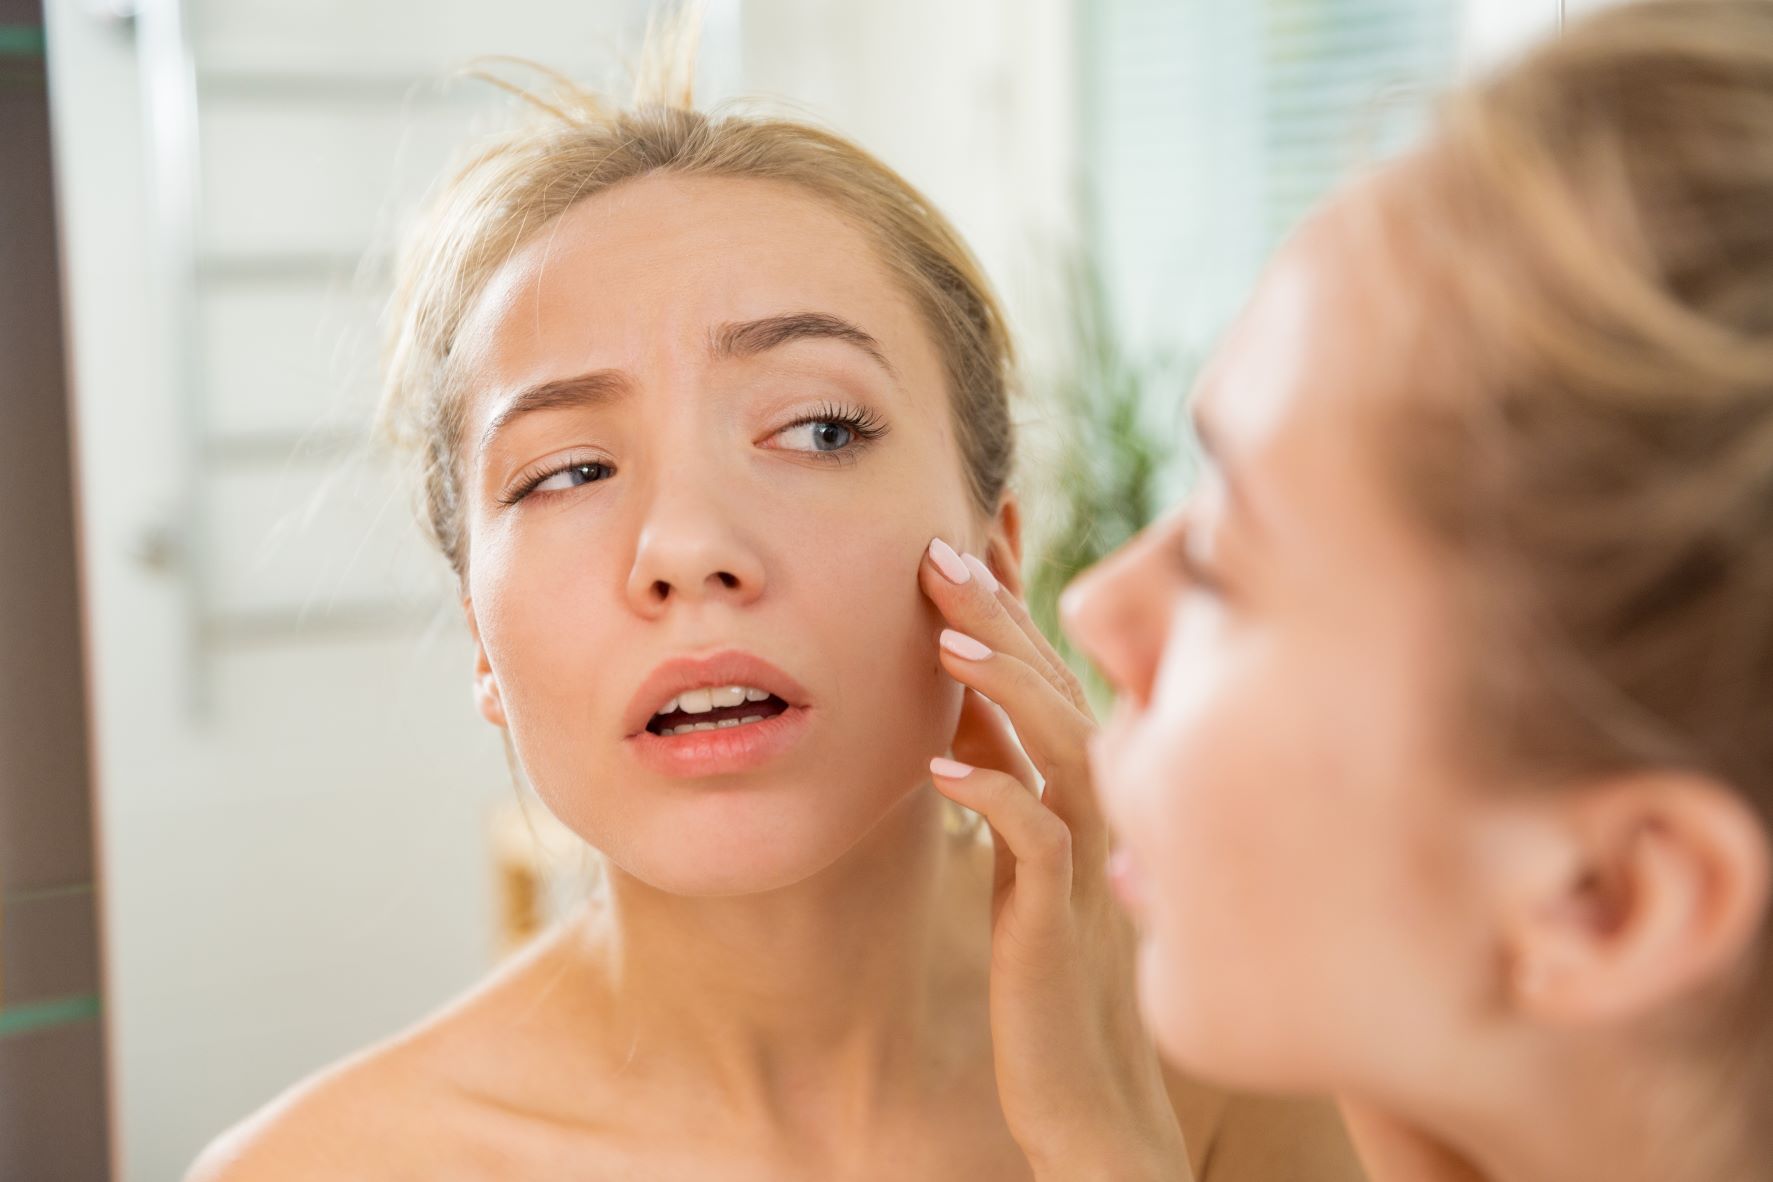 Skin Redness: When to Contact A Dermatologist